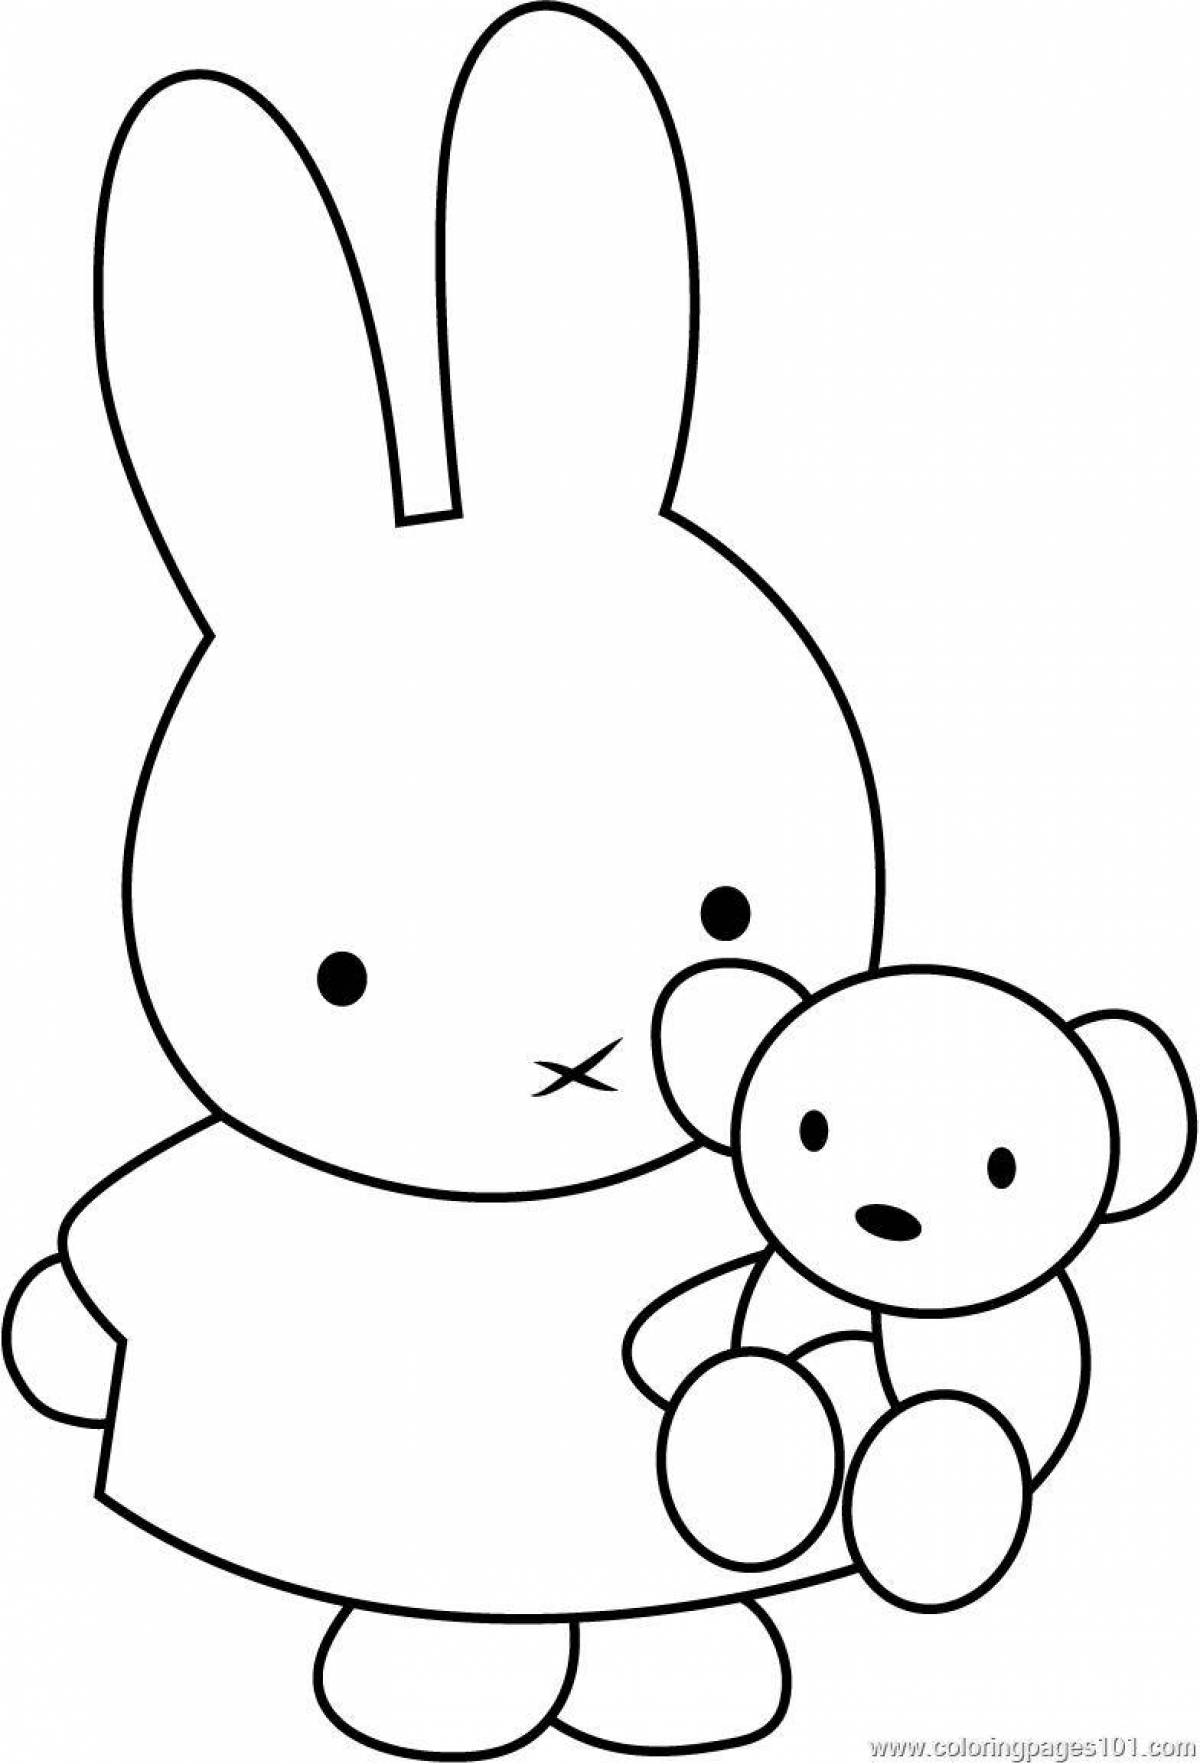 Cute and soft bunny coloring book